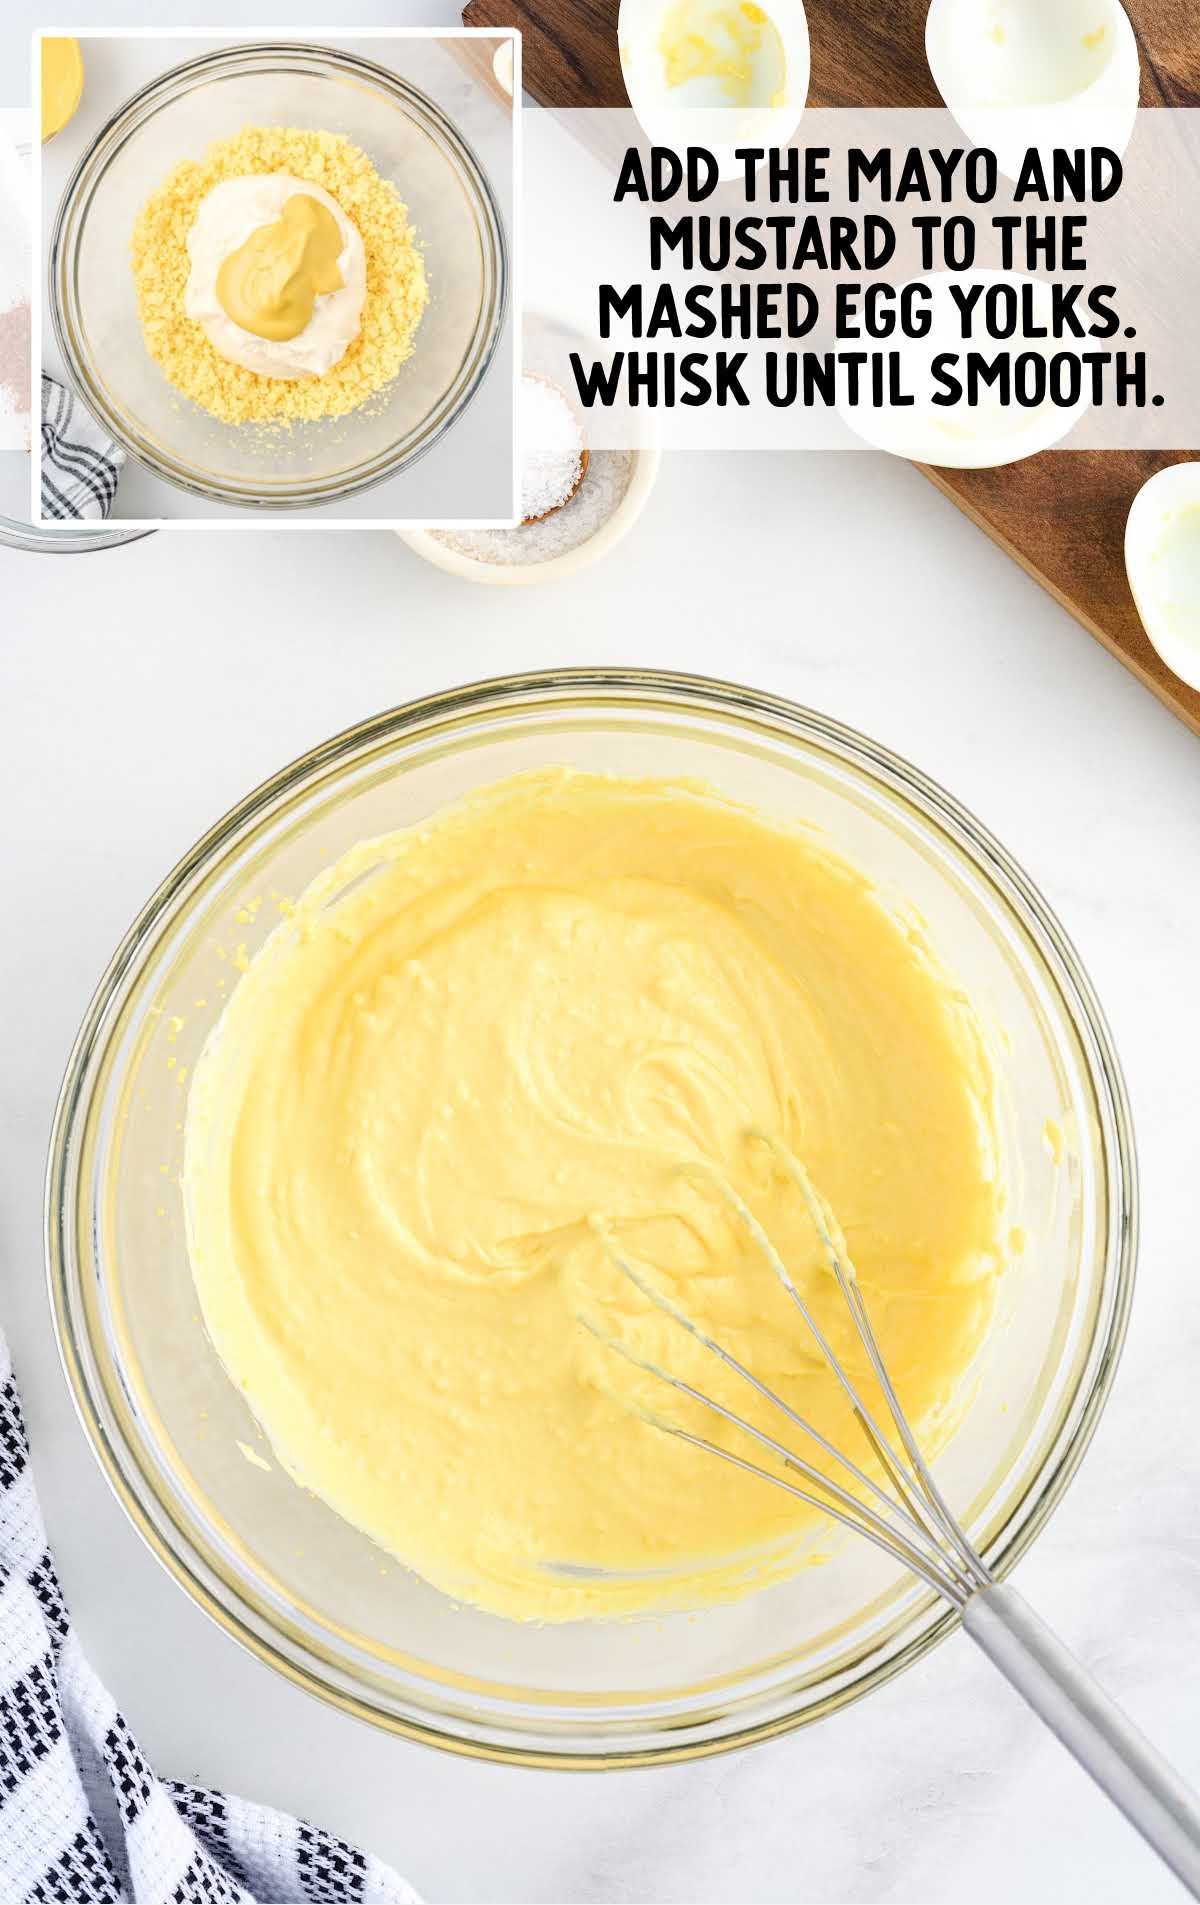 mayonnaise, yellow mustard, and mashed egg yolks whisked together in a bowl